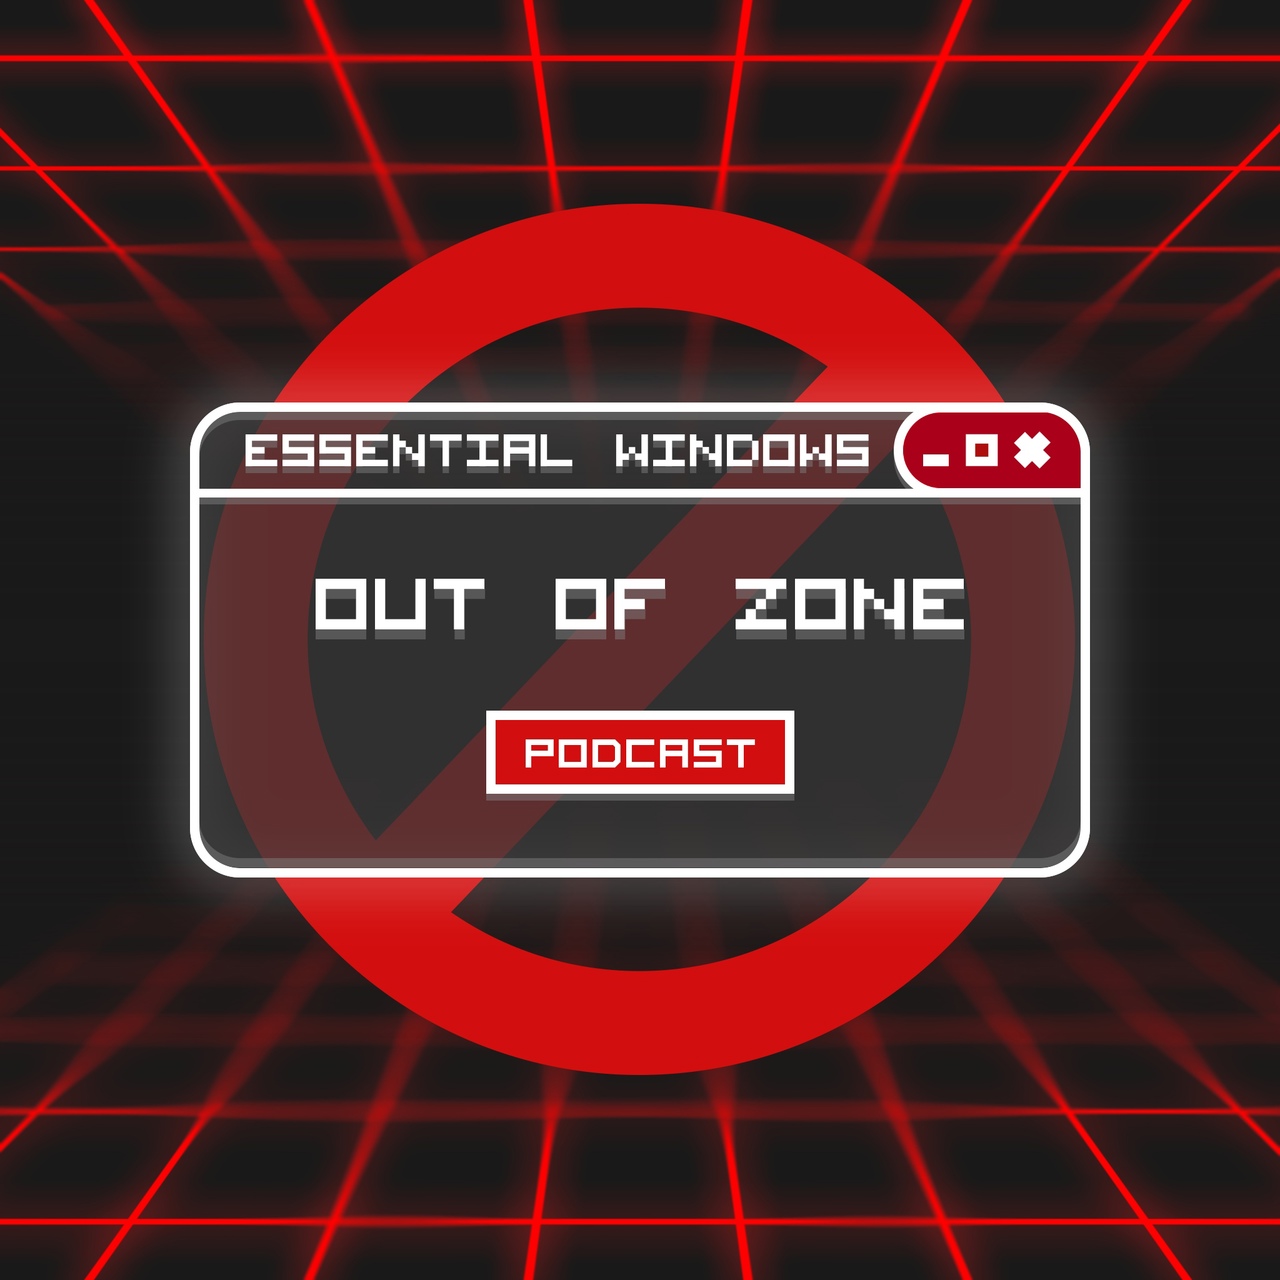 Out of Zone Podcast by Essential Windows